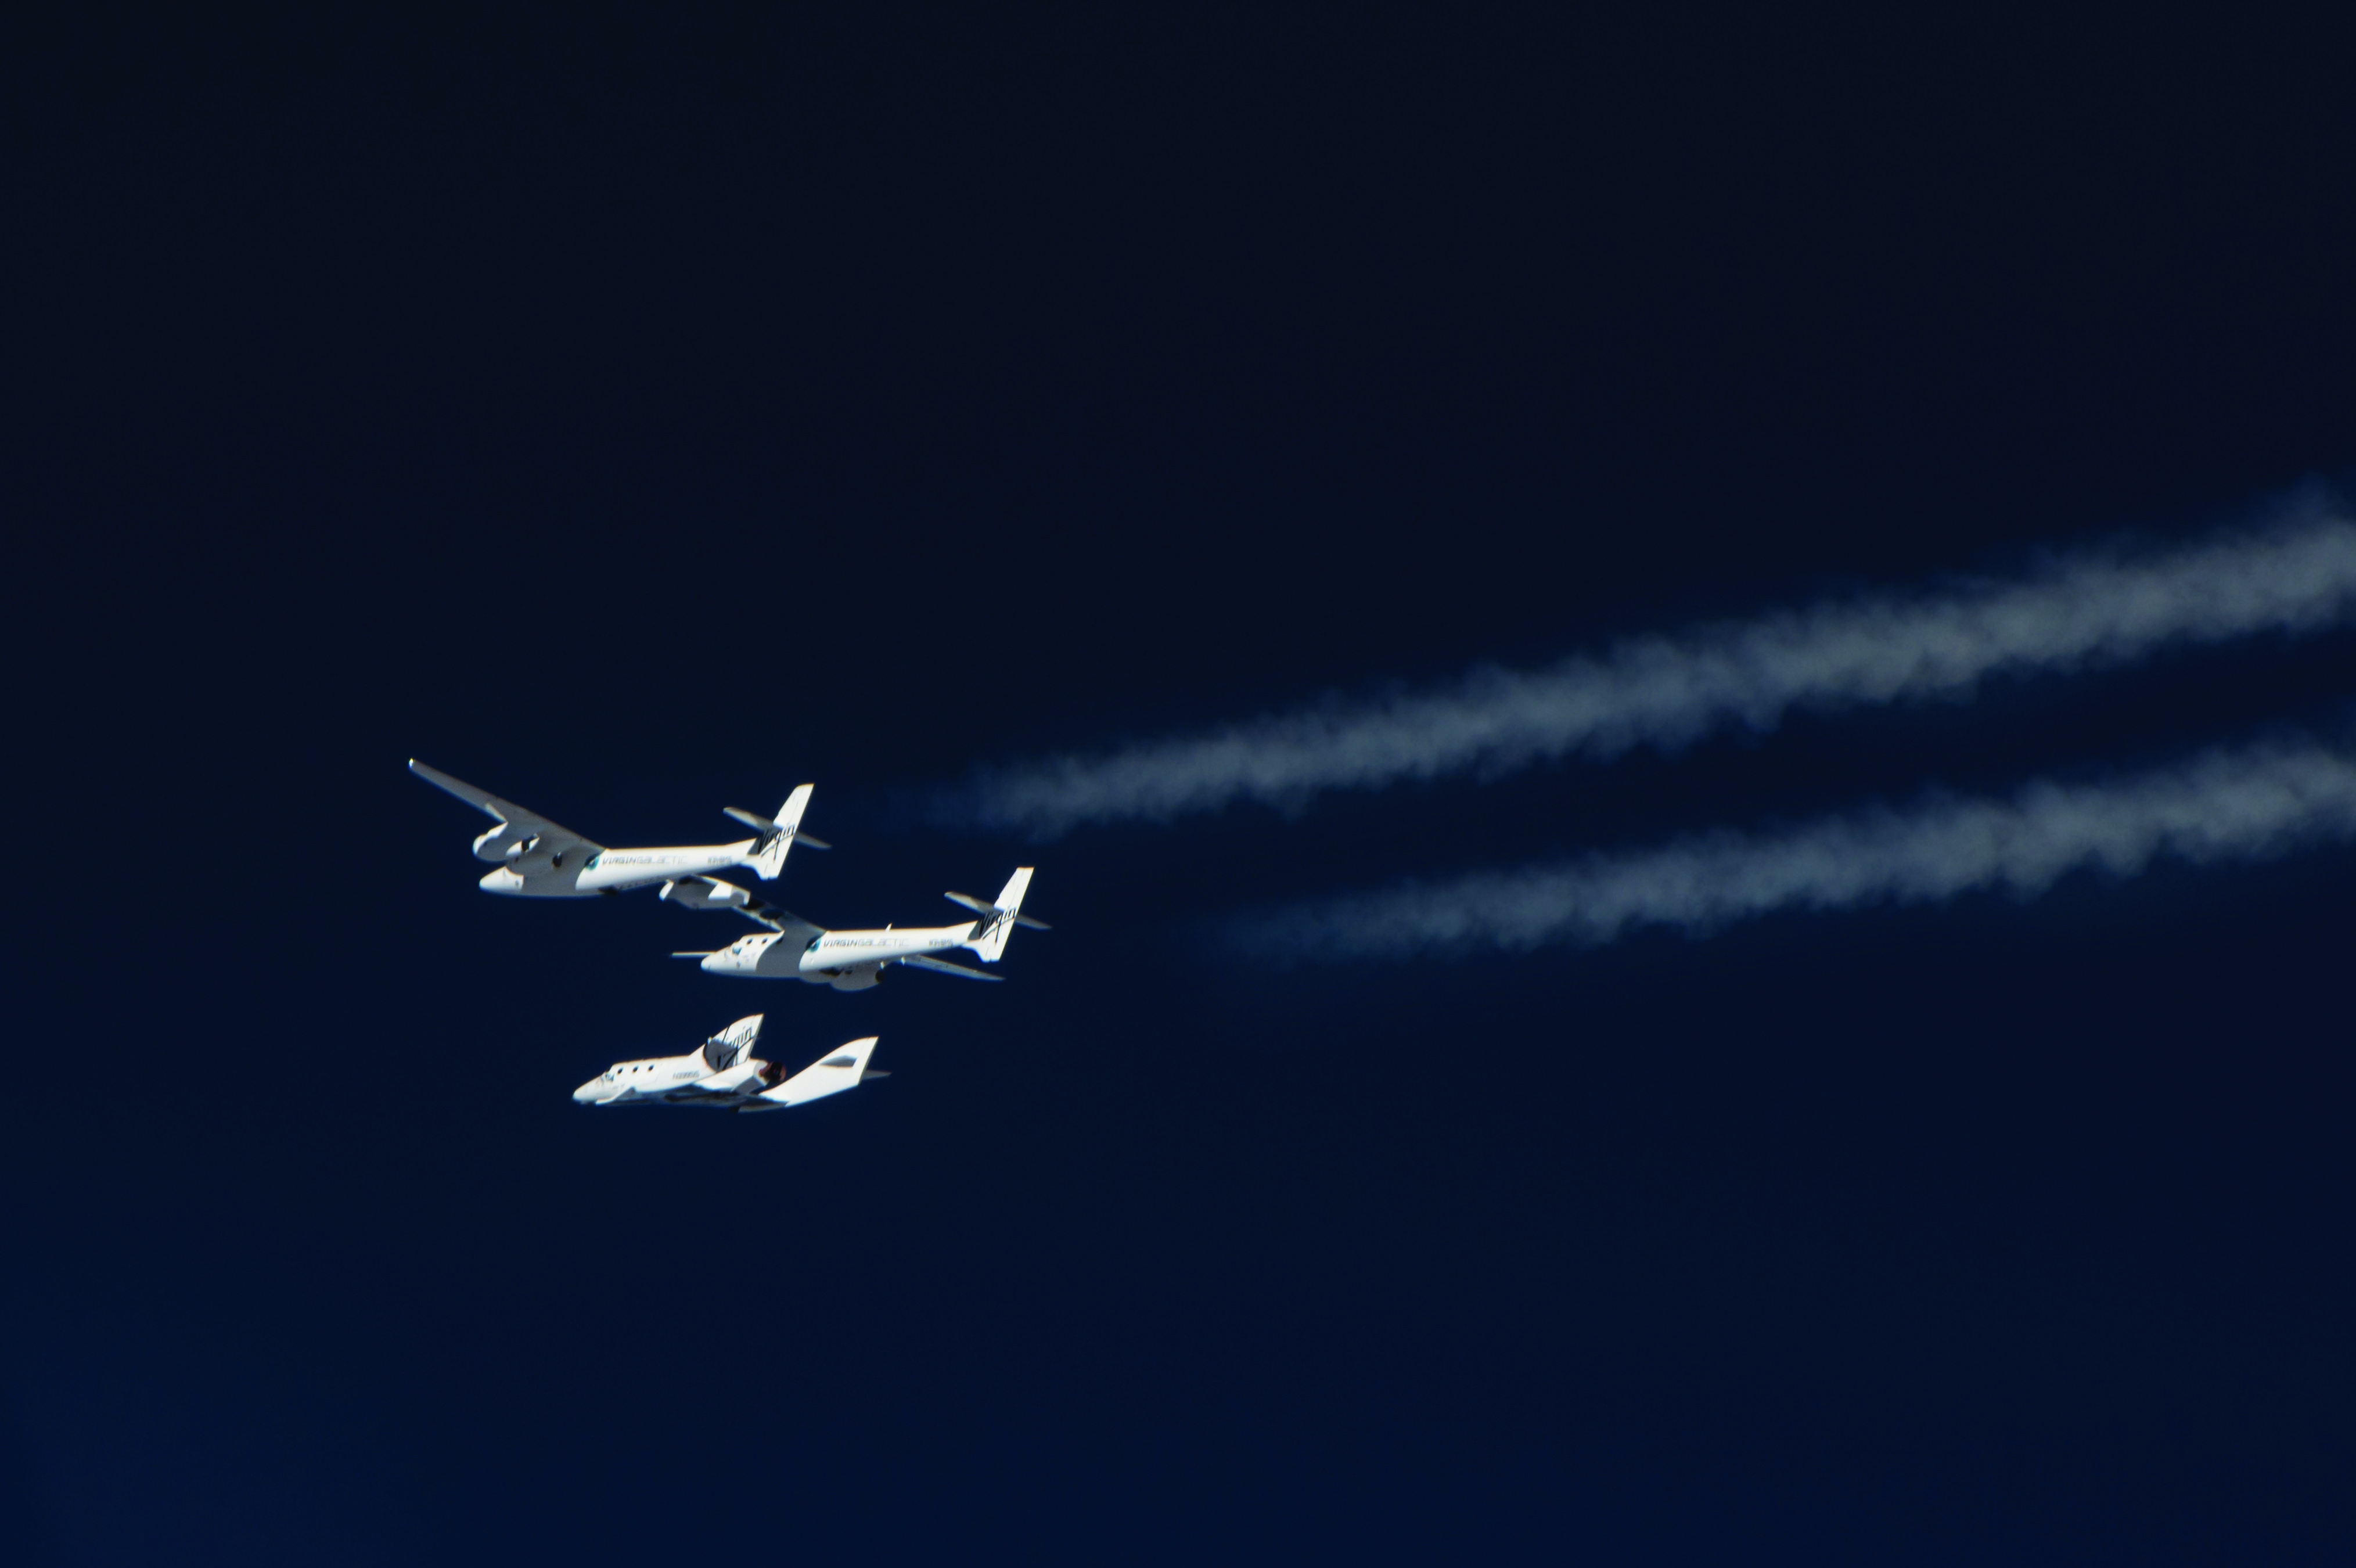 WhiteKnightTwo releases the first SpaceShipTwo during its 24th glide flight over the Mojave desert. Photo Credit: Virgin Galactic